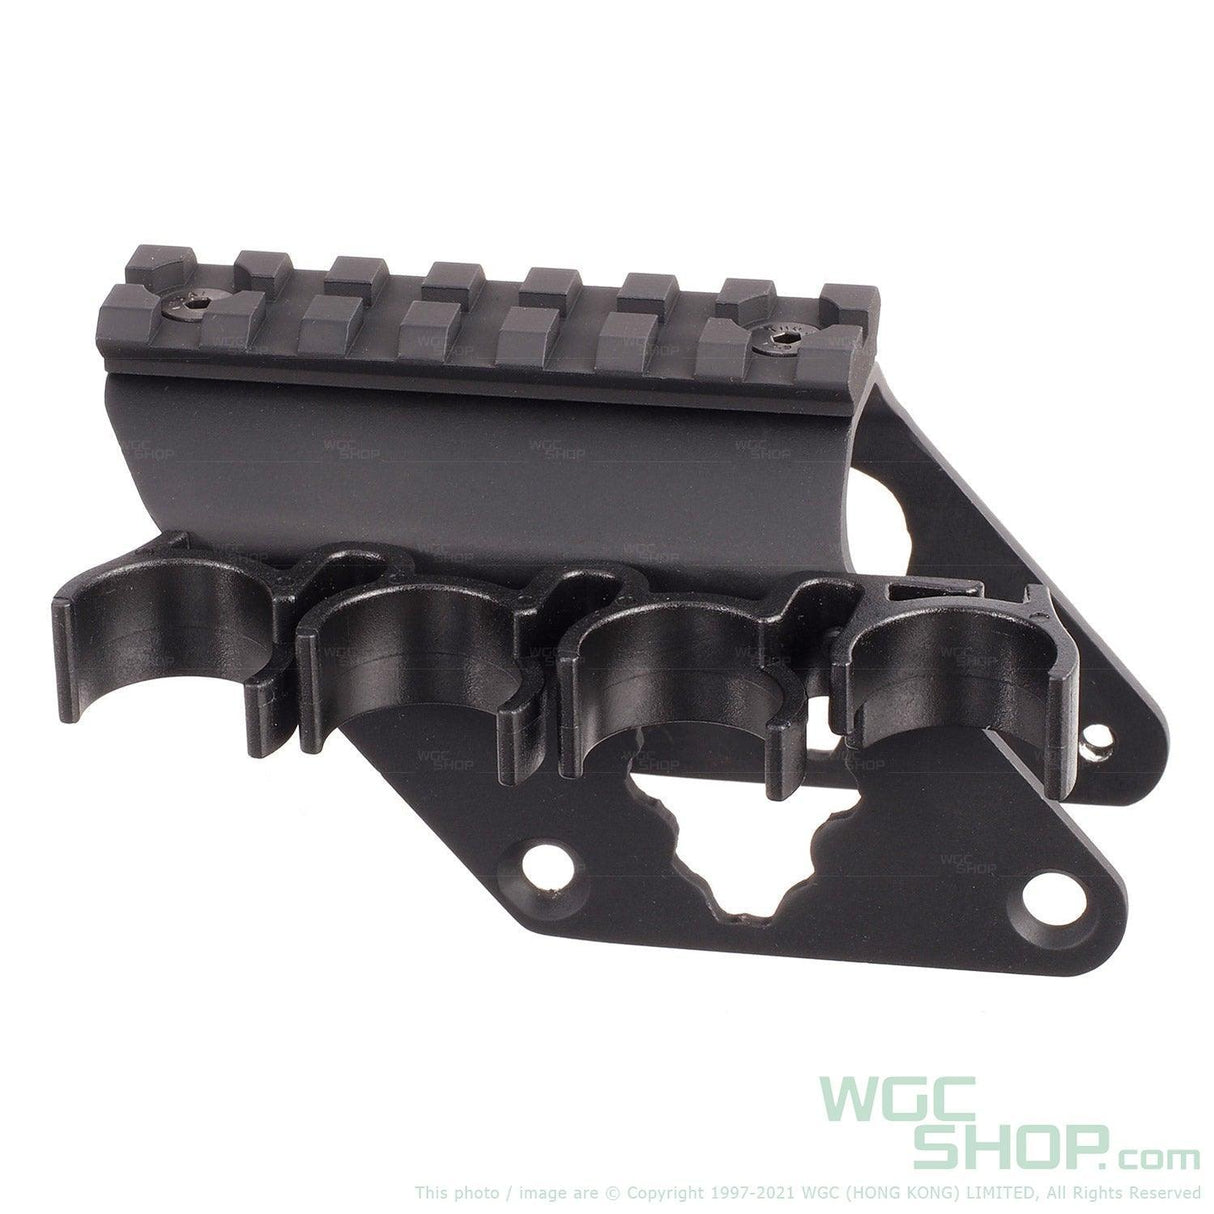 APS Scope Mount With Cartridge Holder for APS CAM870 Airsoft - WGC Shop